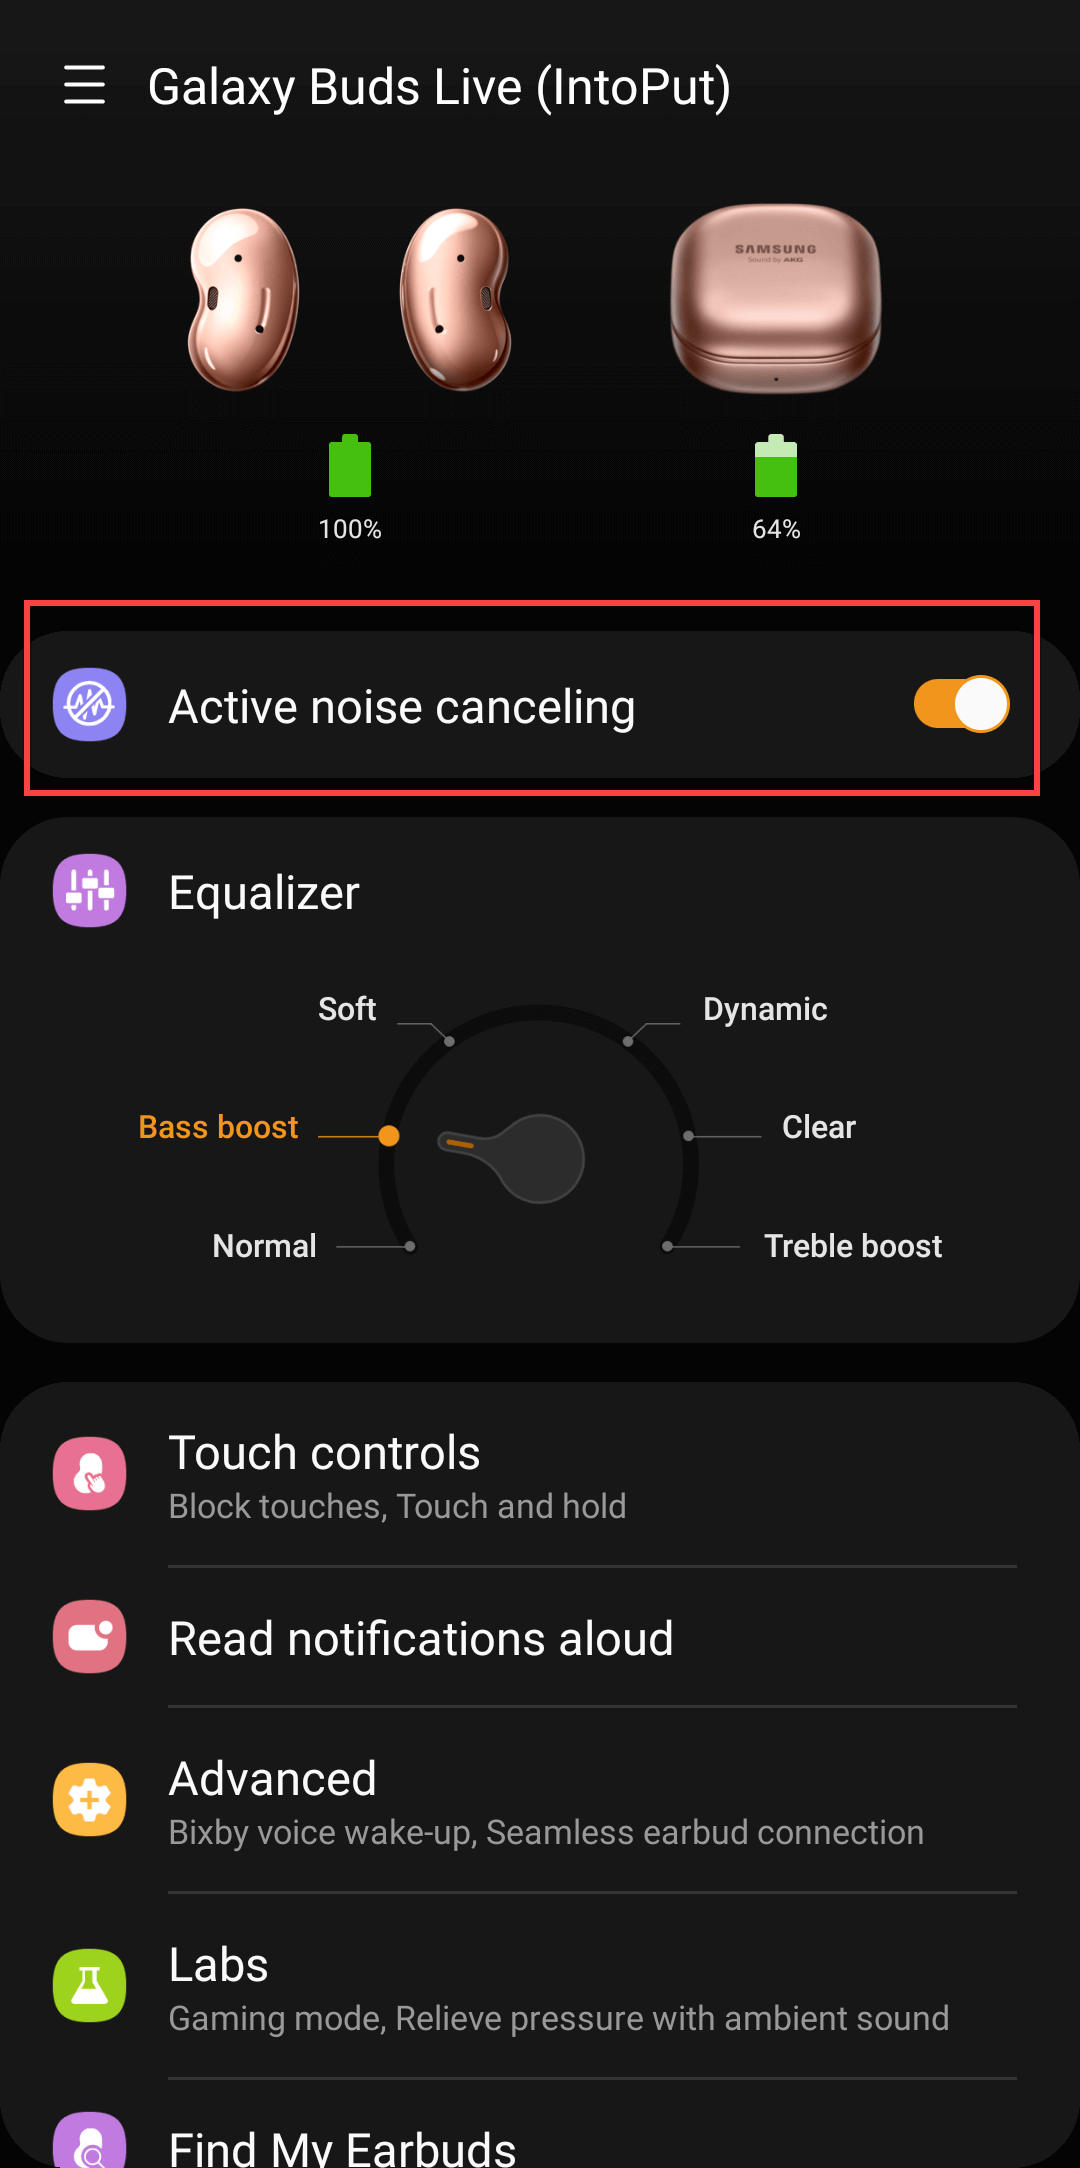 How to Activate Noise Cancellation in Buds Live with Galaxy Wearable App